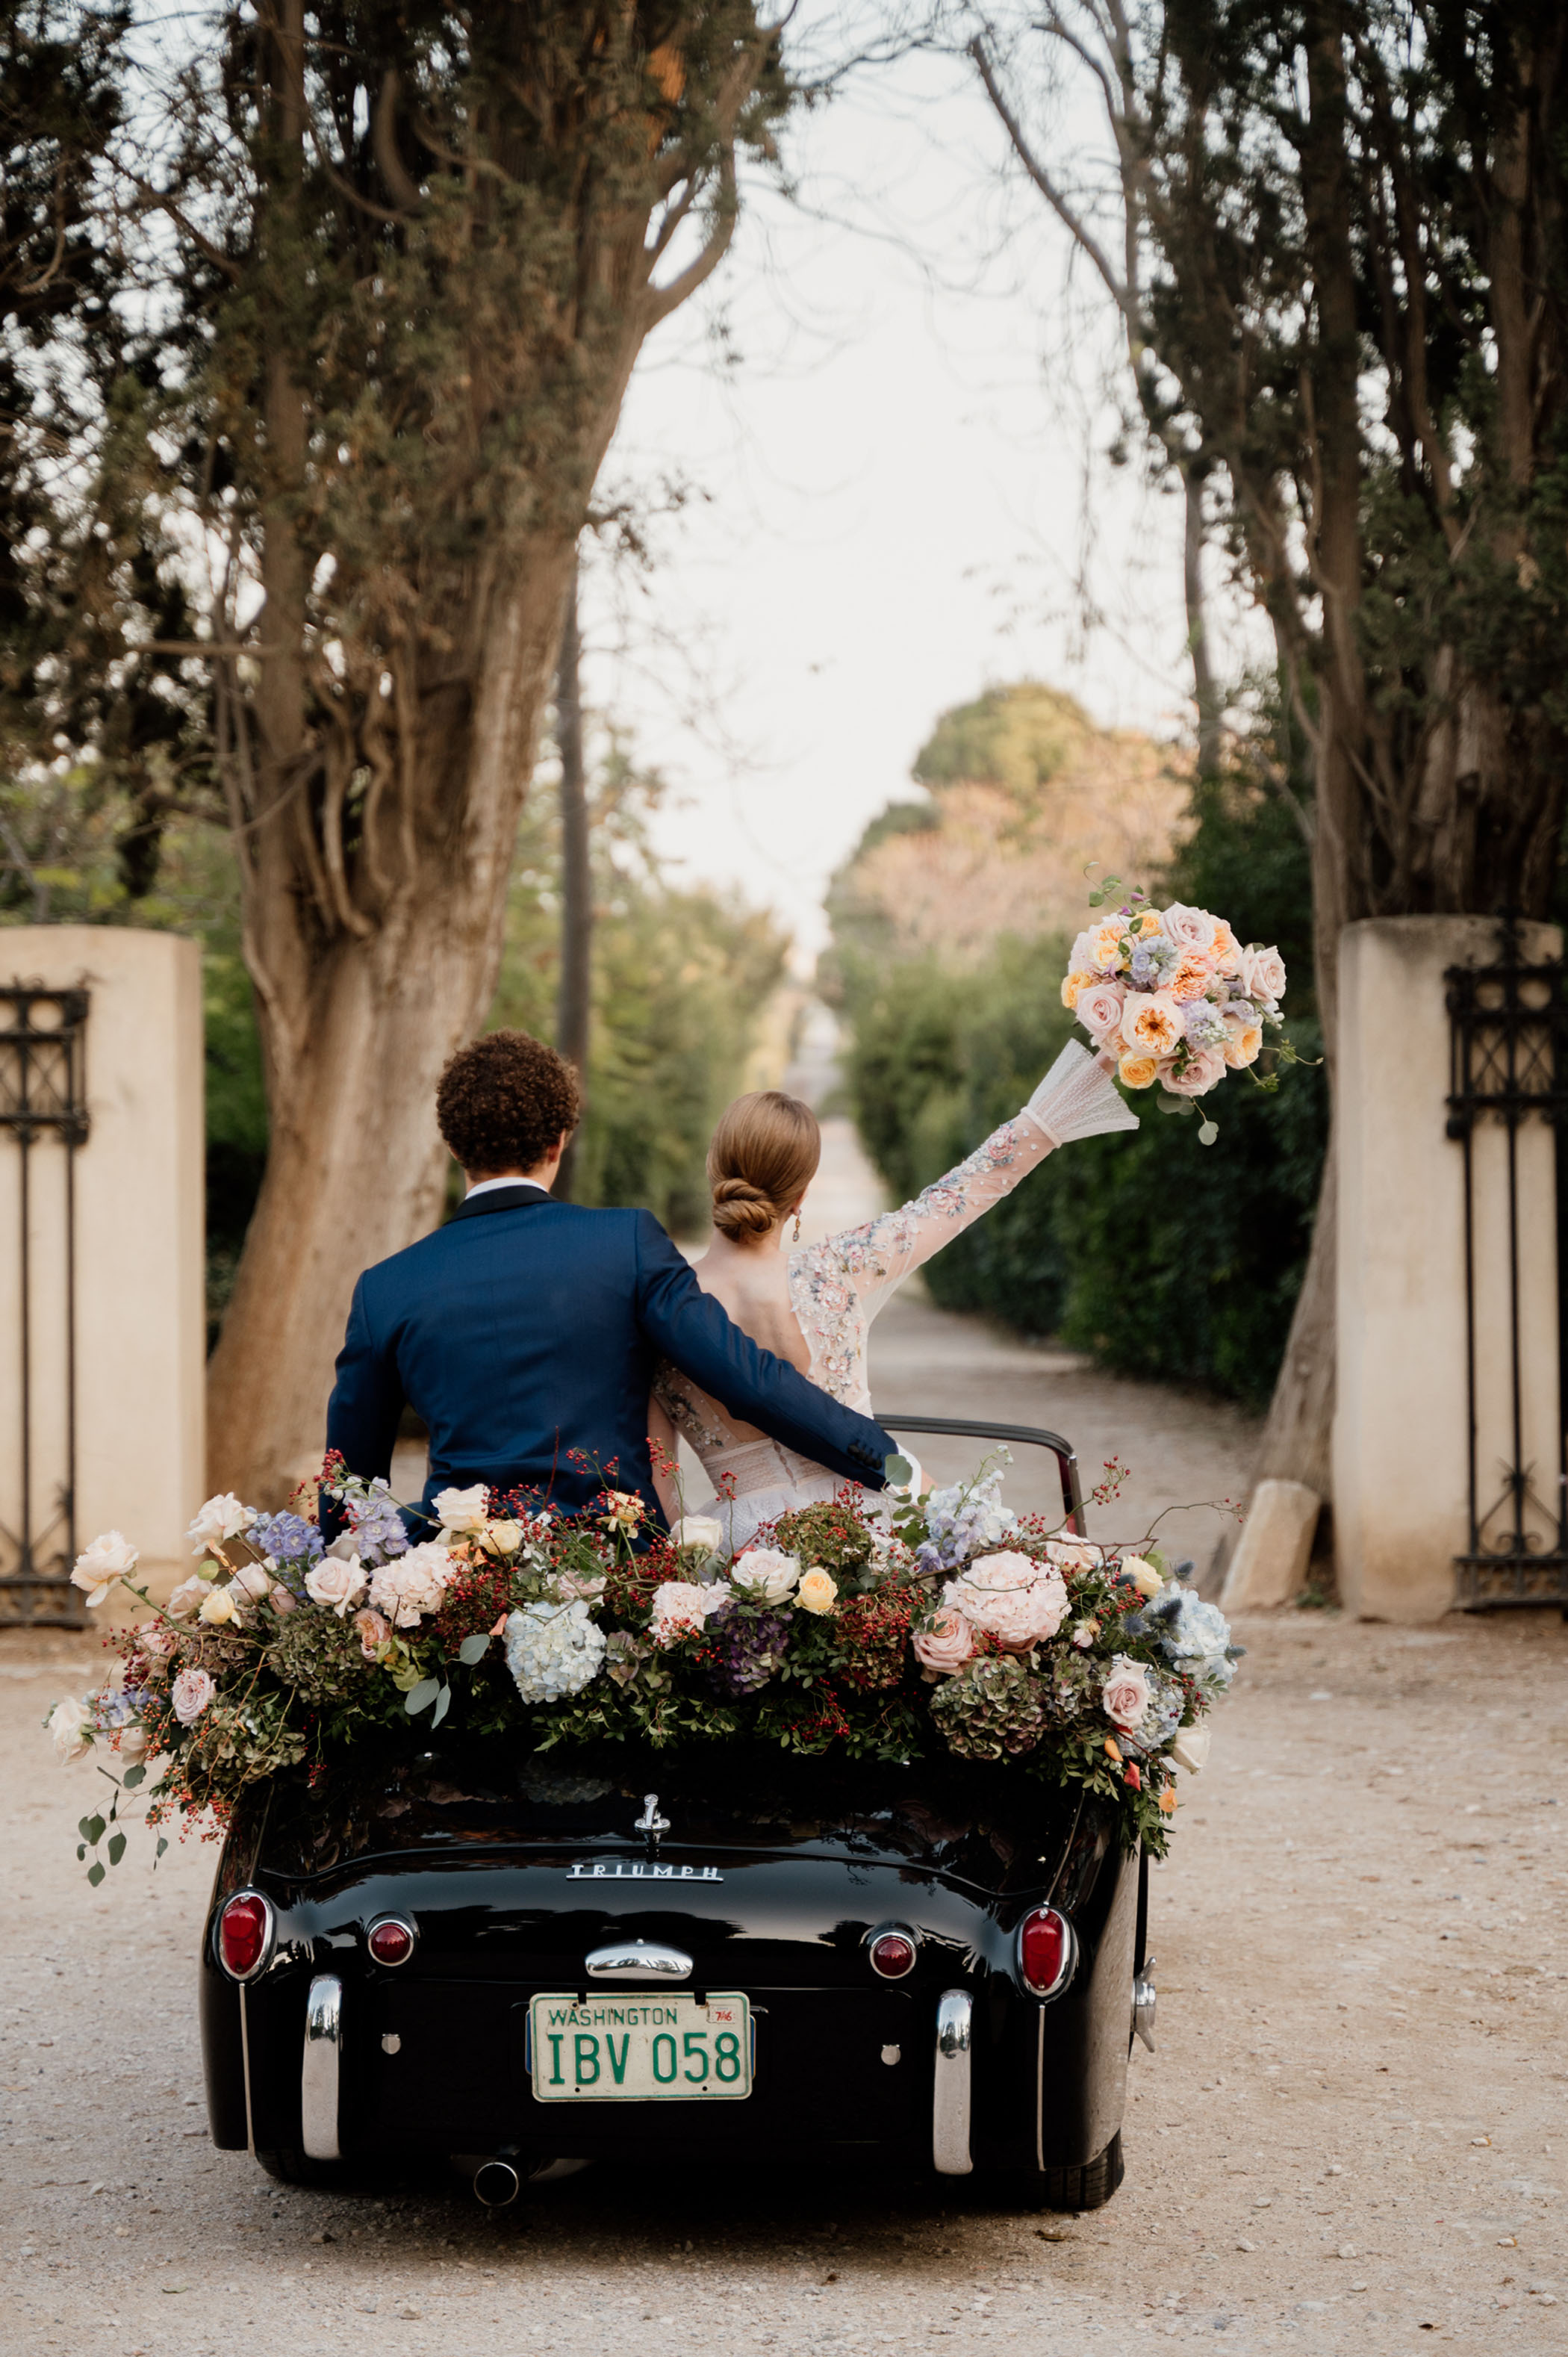 Romantic vintage wedding vibes bloom at the Queen's Tower in Athens